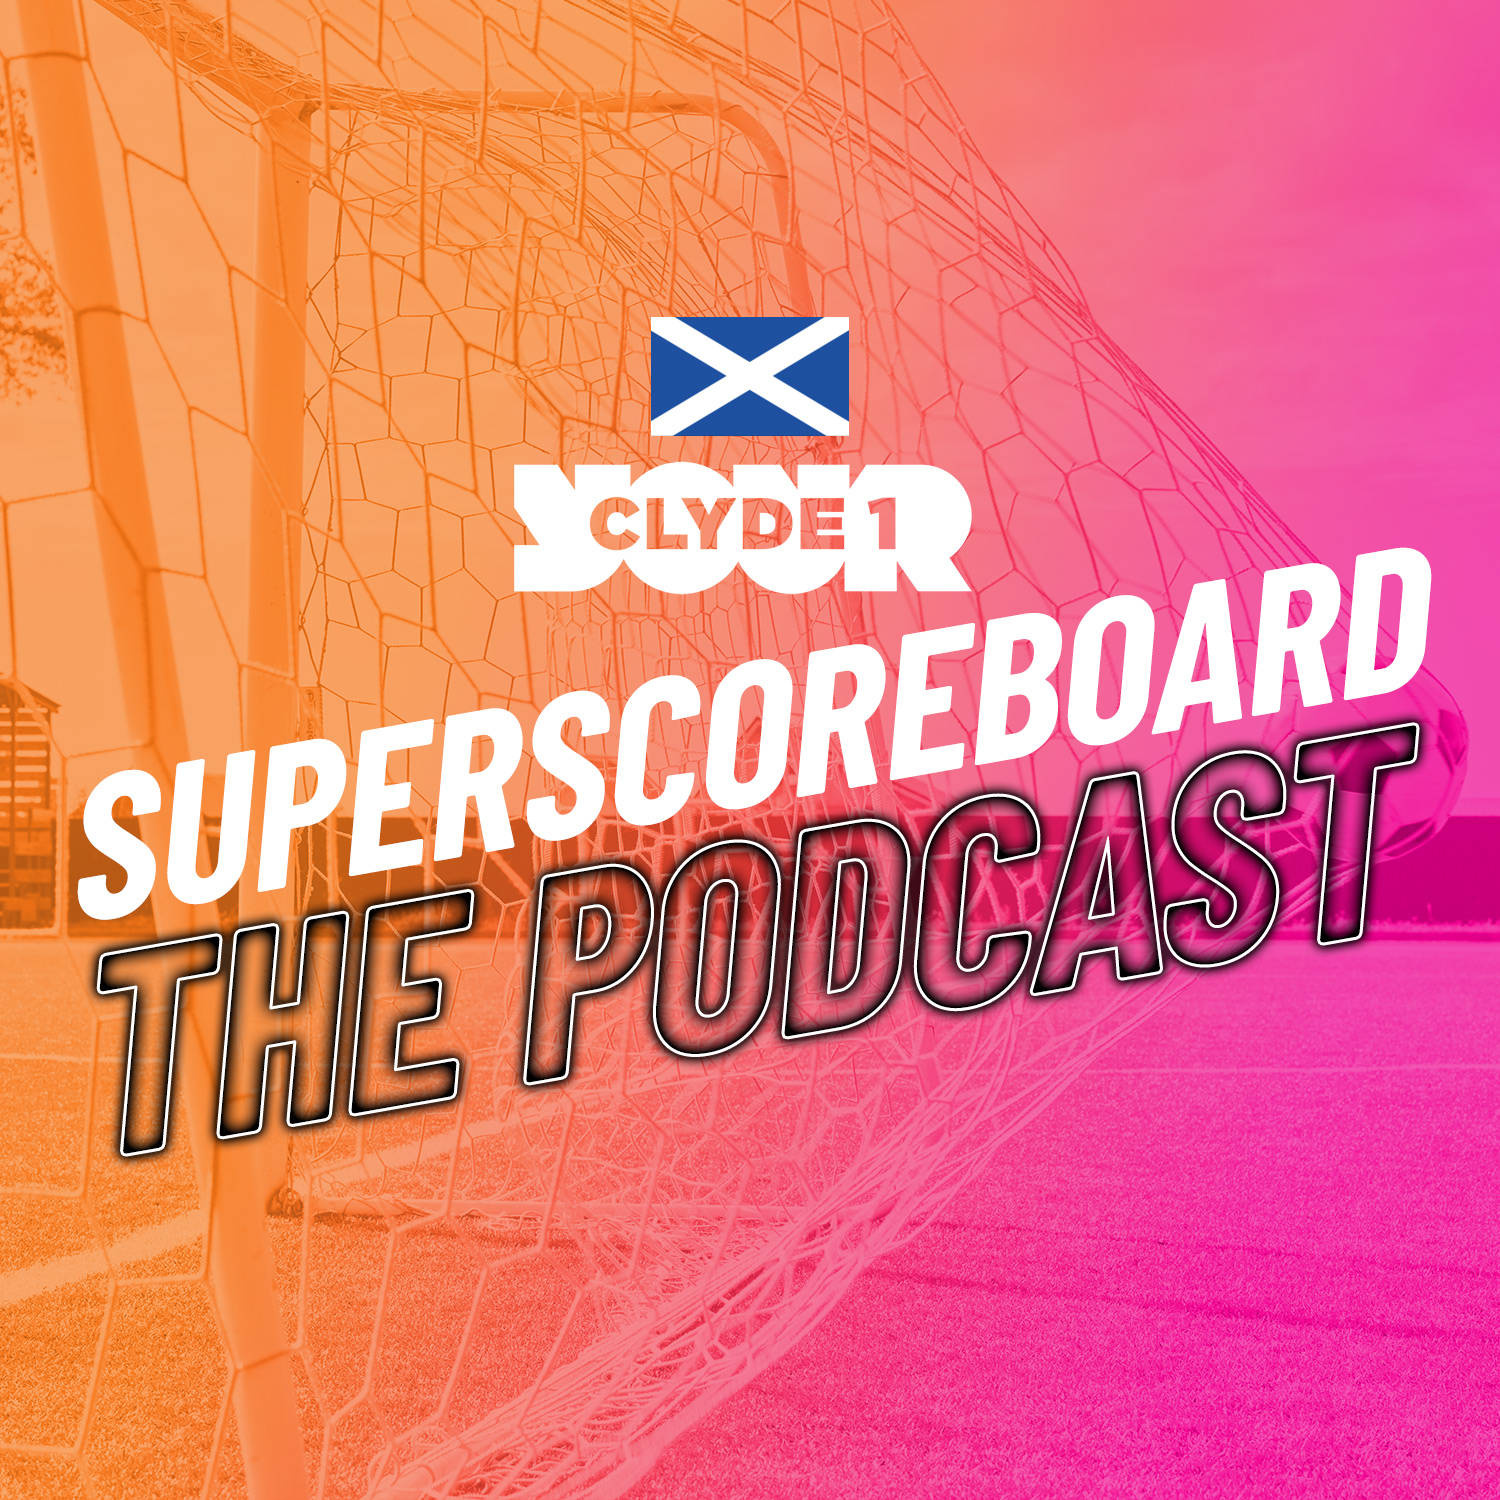 Tuesday 28th May Clyde 1 Superscoreboard